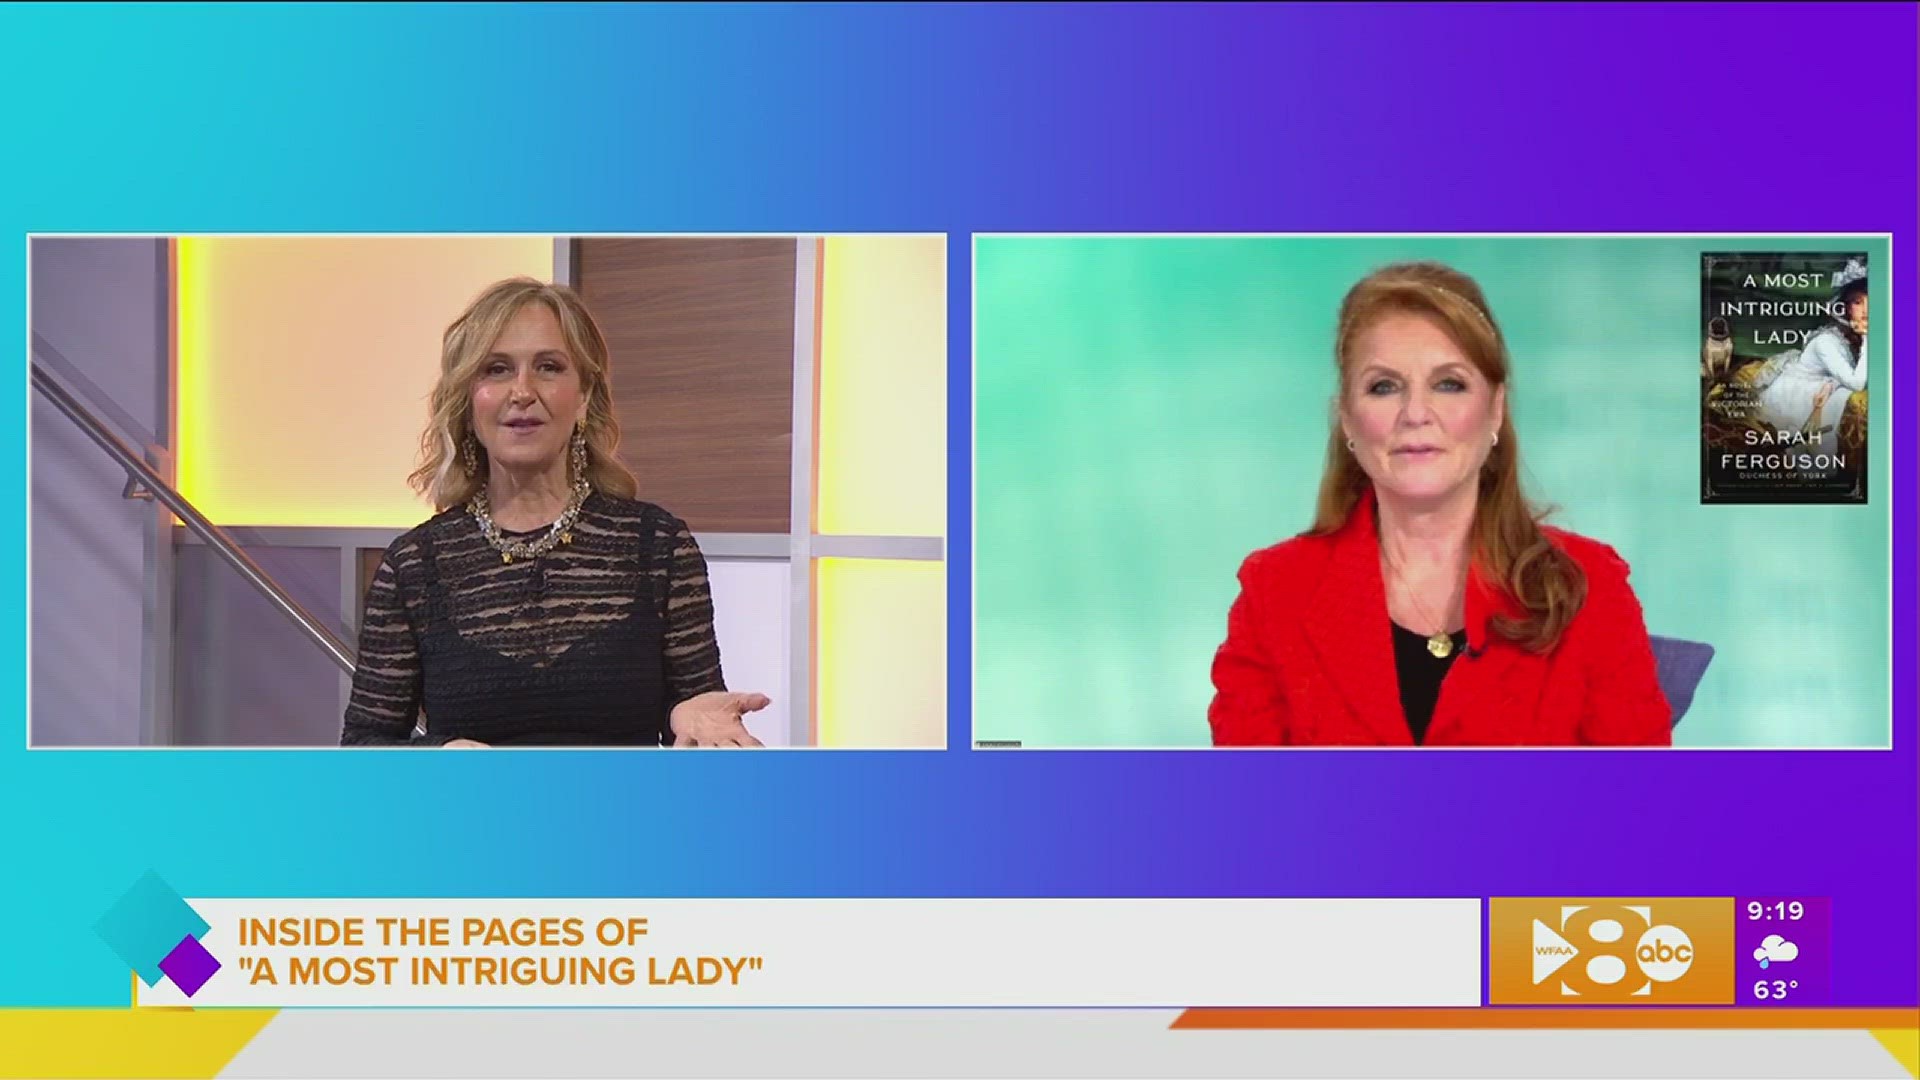 Sarah Ferguson, Duchess of York takes us into the pages of her new historical novel, "A Most Intriguing Lady".